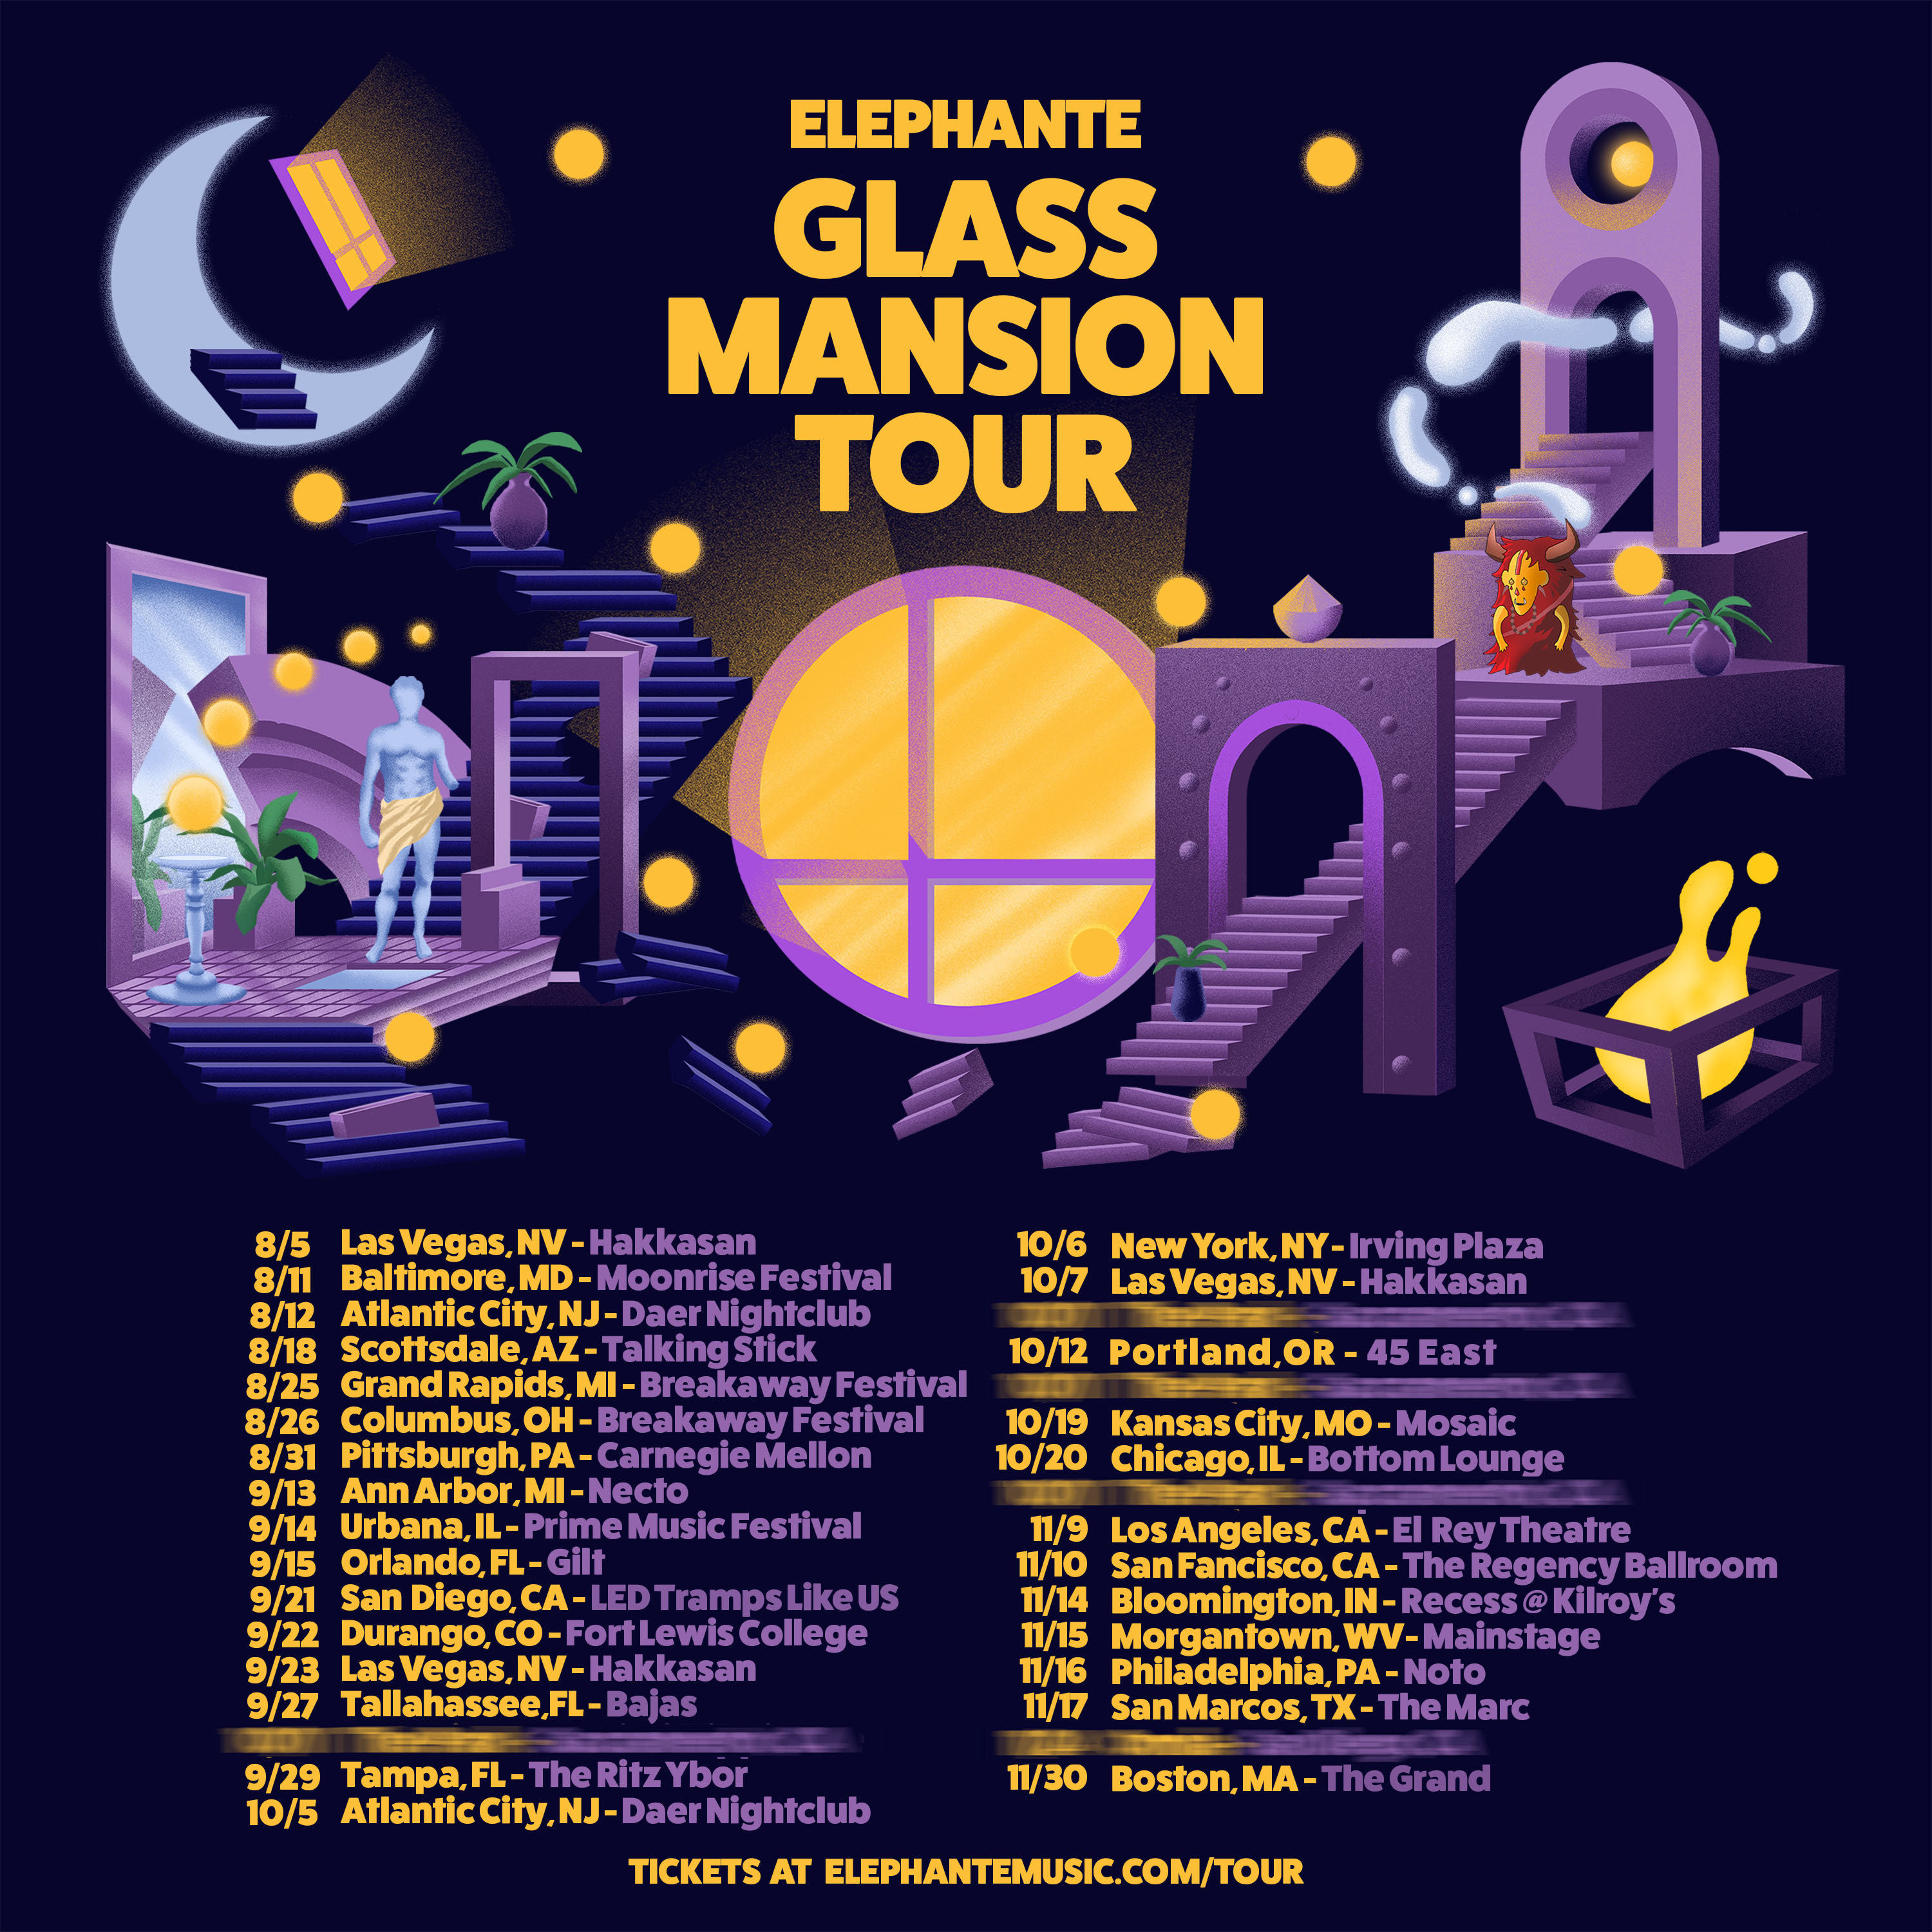 After kicking off the summer on the highest of notes with his nine-track sophomore project ‘Glass Mansion’, Elephante is gearing up to head back out on a fully packed fall tour. 
 
PURCHASE: ELEPHANTE’S ‘GLASS MANSION’ FALL TOUR TICKETS
 
With the EP immediately met to widespread critical acclaim and boasting over 10 million streams on Spotify in just a few short weeks, the Los Angeles native is seeking to expand on that by bringing his highly sought-after music to fans around the states, unleashing an innovative creative concept and unique production unlike anything he has ever done before. 
 
The undeniably extensive fall run spans 33 cities where Elephante will make stops across all corners of the United States. The multifaceted producer and DJ will make appearances at some of the season’s largest festivals including Moonrise Festival, Breakaway Festival and Prime Music Festival in addition to reigniting his annual residency at Hakkasan in Las Vegas. Additional performances include stops in Atlantic City, New York, Portland, Los Angeles, Philadelphia and many more. There are also a handful of unannounced shows thrown into the mix so fans who unfortunately see their city missing may be in luck in the coming weeks as more information is revealed.
 
STREAM: ELEPHANTE – GLASS MANSION
 
Since the start of the summer of 2017, Elephante has taken the decks on the stage at over 20 of the planet’s most attended festivals including EDC Las Vegas, Electric Zoo, Sunset Music Fest in Tampa and many more. His ‘Glass Mansion’ EP hit the #1 spot on iTunes’ Dance chart following its release this past June and Elephante is surely looking to keep his heavy momentum rolling in the coming months. Tickets for his ‘Glass Mansion’ fall run are officially on sale now so fans can start their preparation ahead of its kickoff show next weekend at Hakkasan.